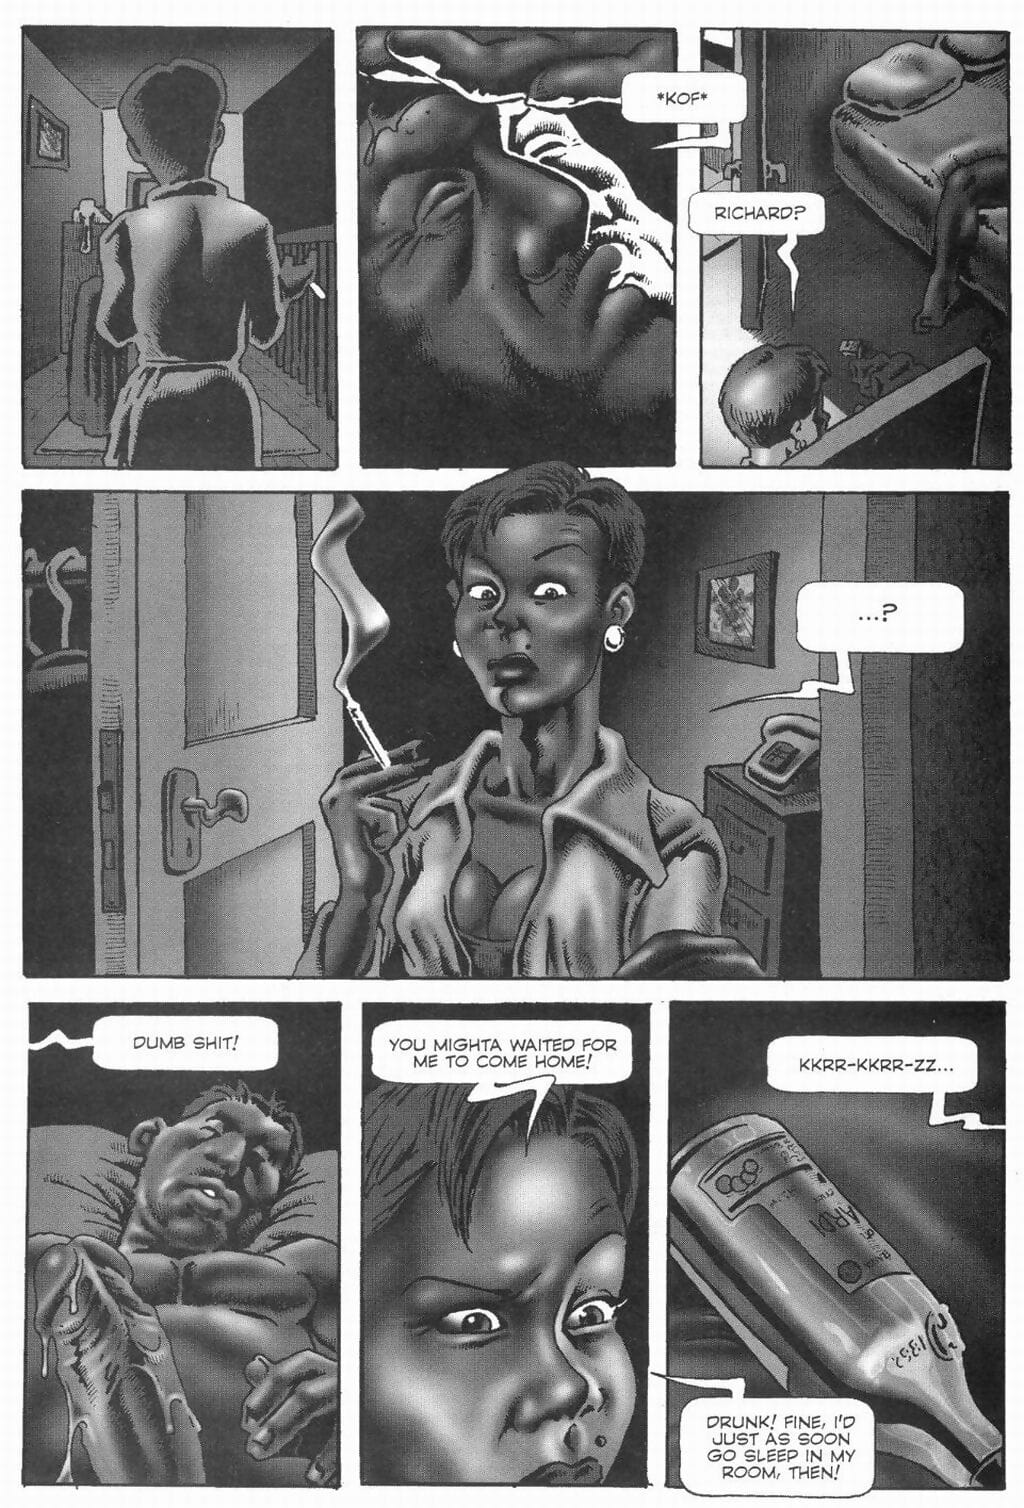 Alraune #1 page 1